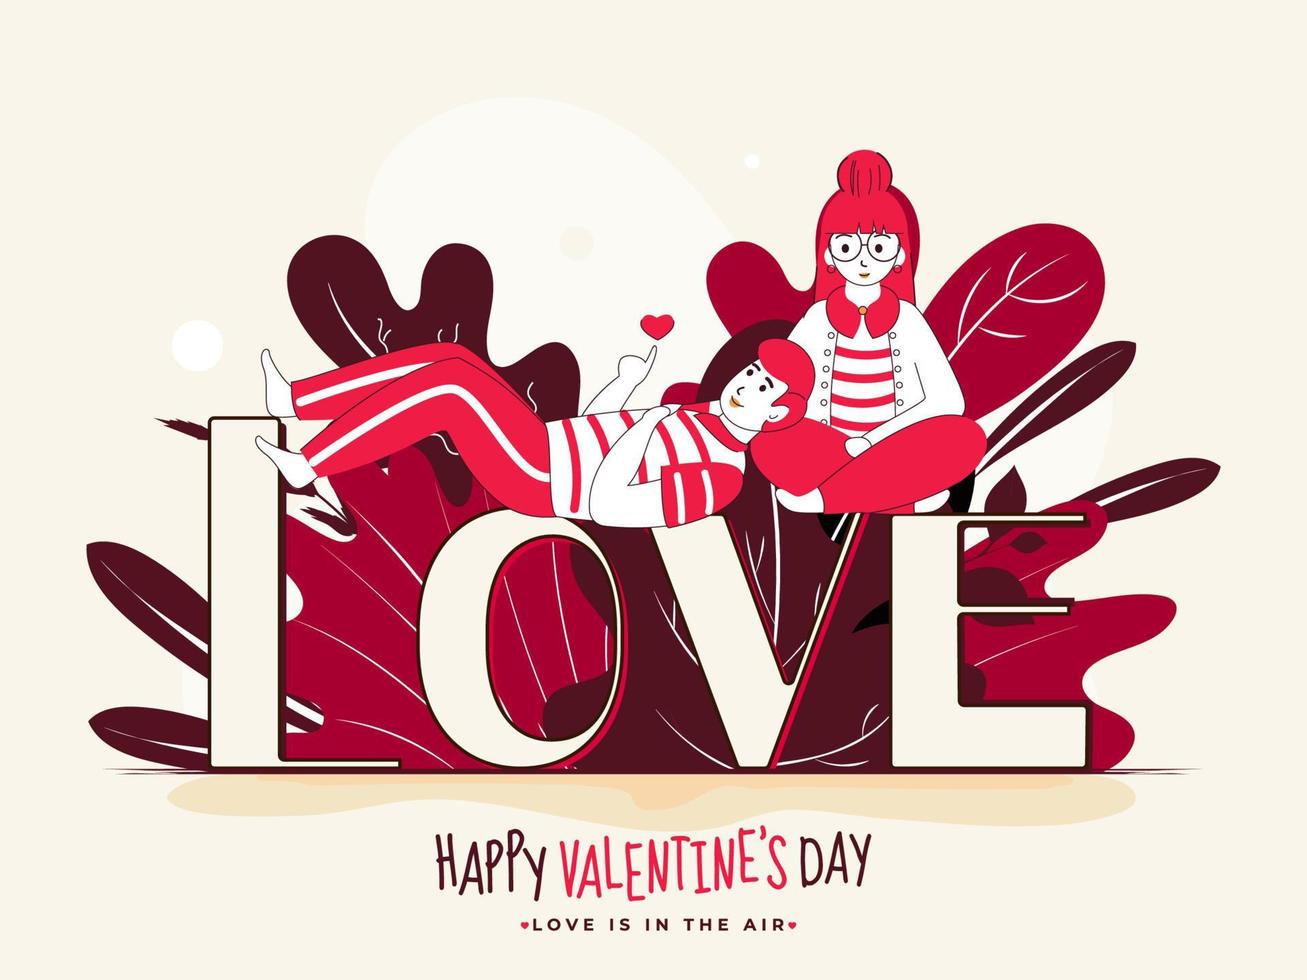 Young Girl with Boy Lying Down Showing Heart from Hand on Love Font for Happy Valentines Day Concept. vector